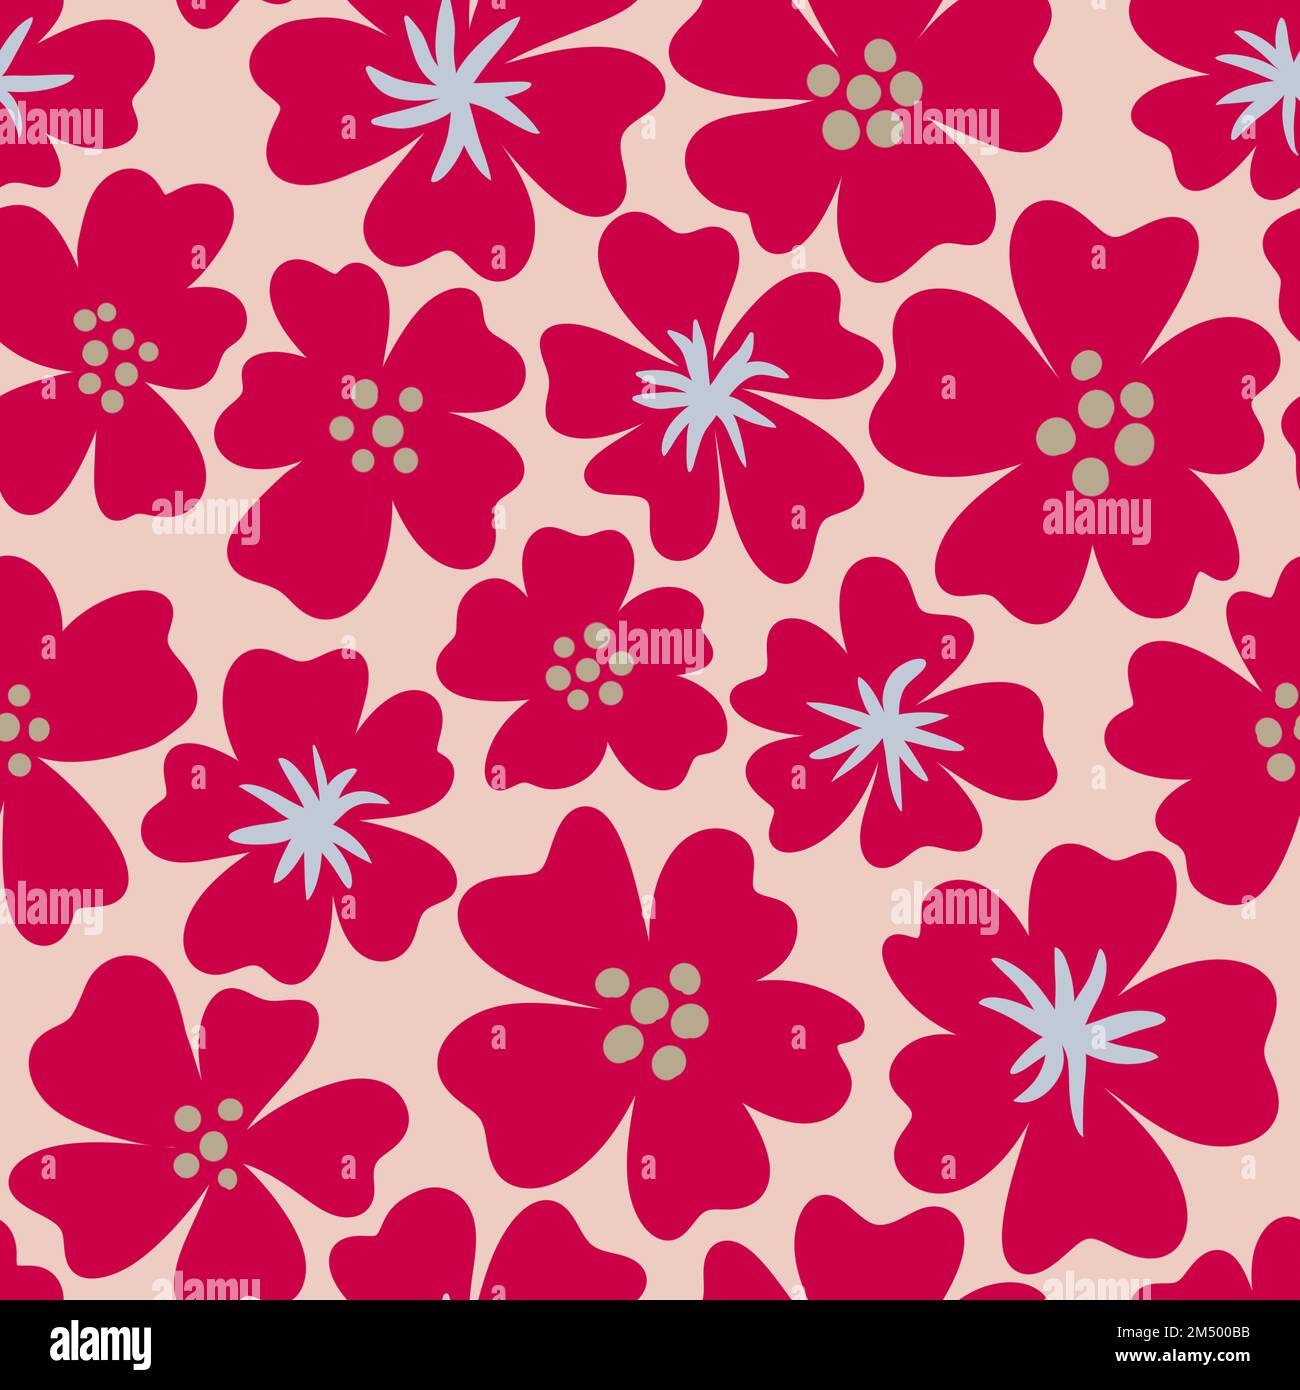 Magenta Flowers Images Browse 261371 Stock Photos  Vectors Free Download  with Trial  Shutterstock